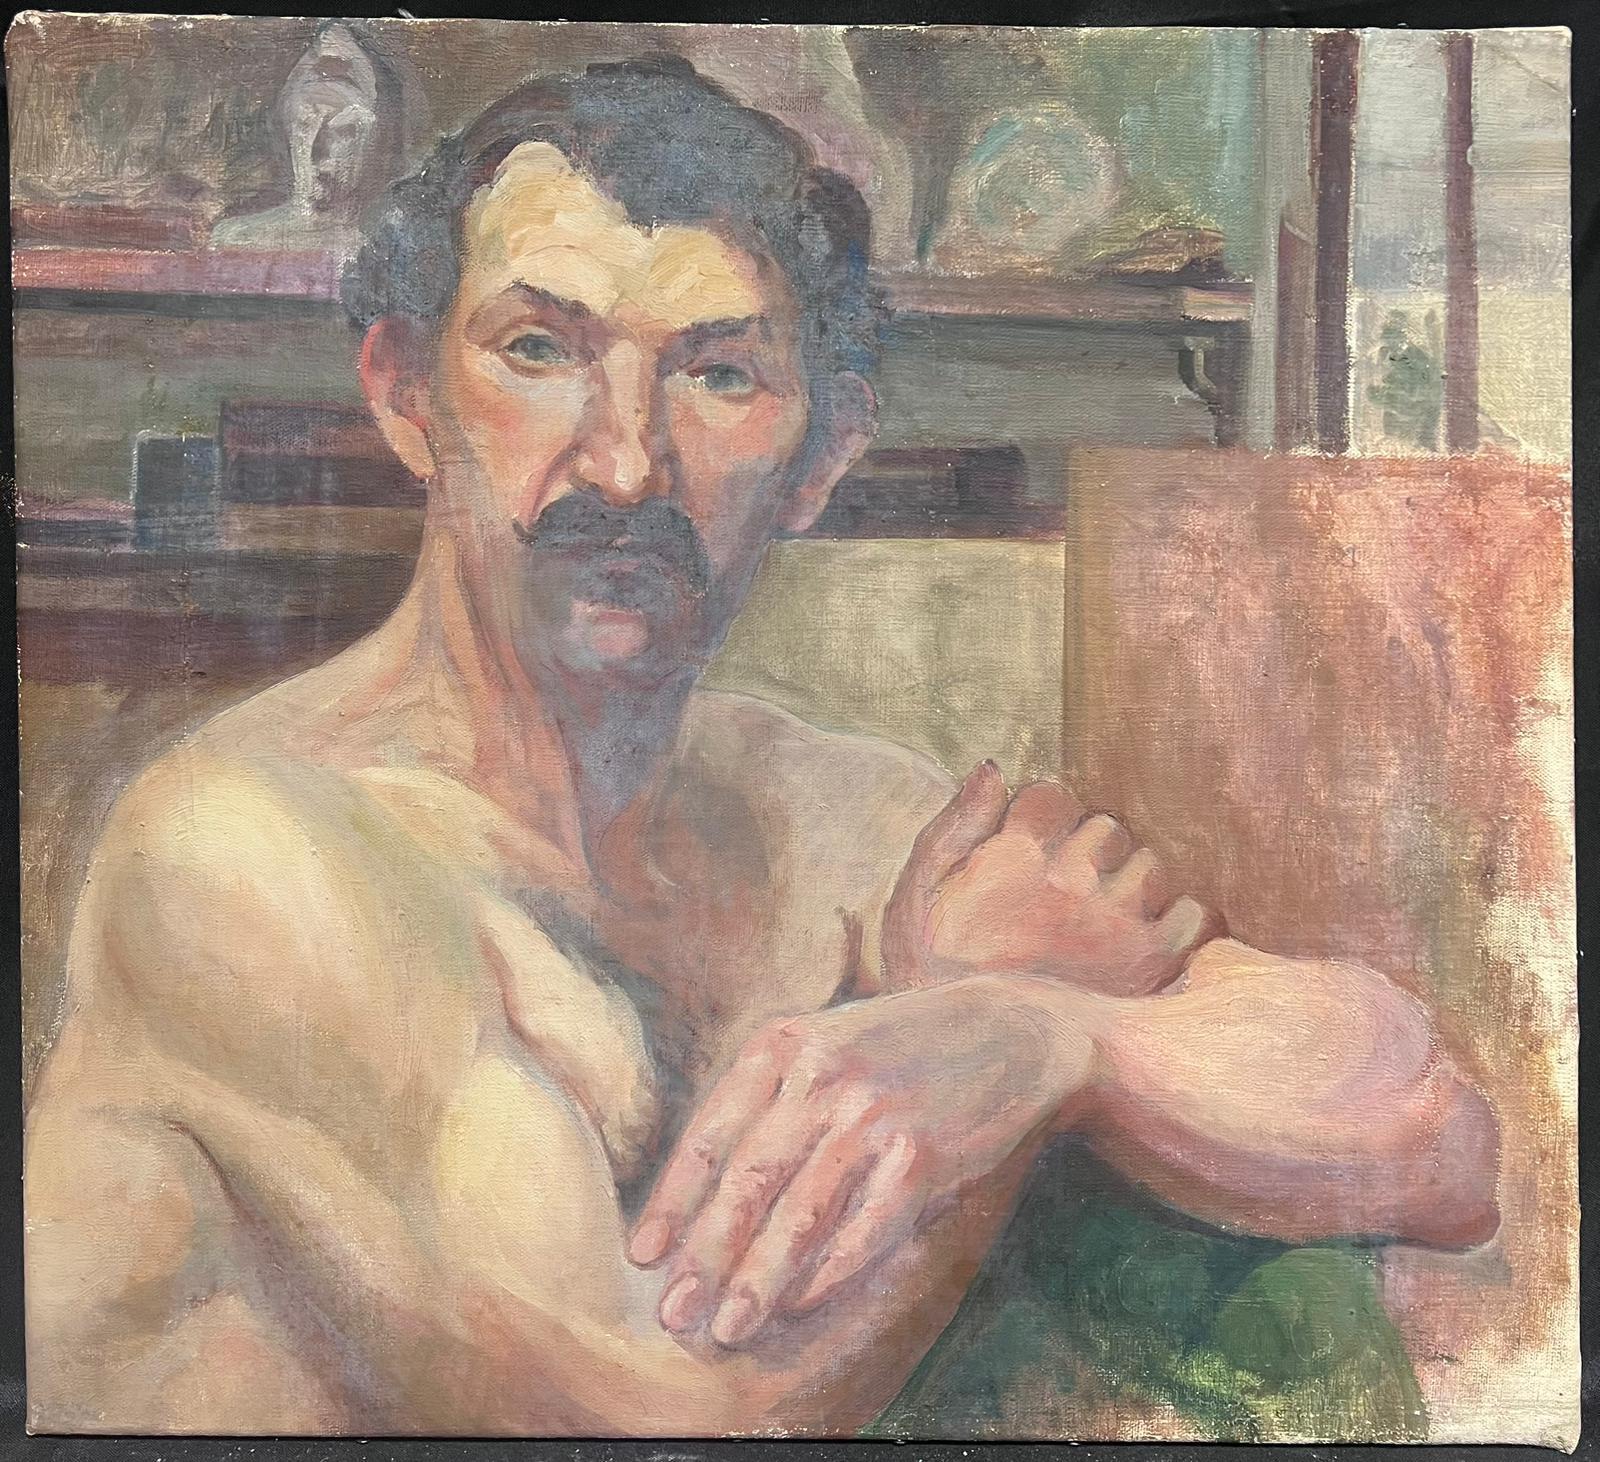 Mid 20th Century French Nude Man Folding his Arms posing for Portrait, oil paint - Painting by Louise Alix